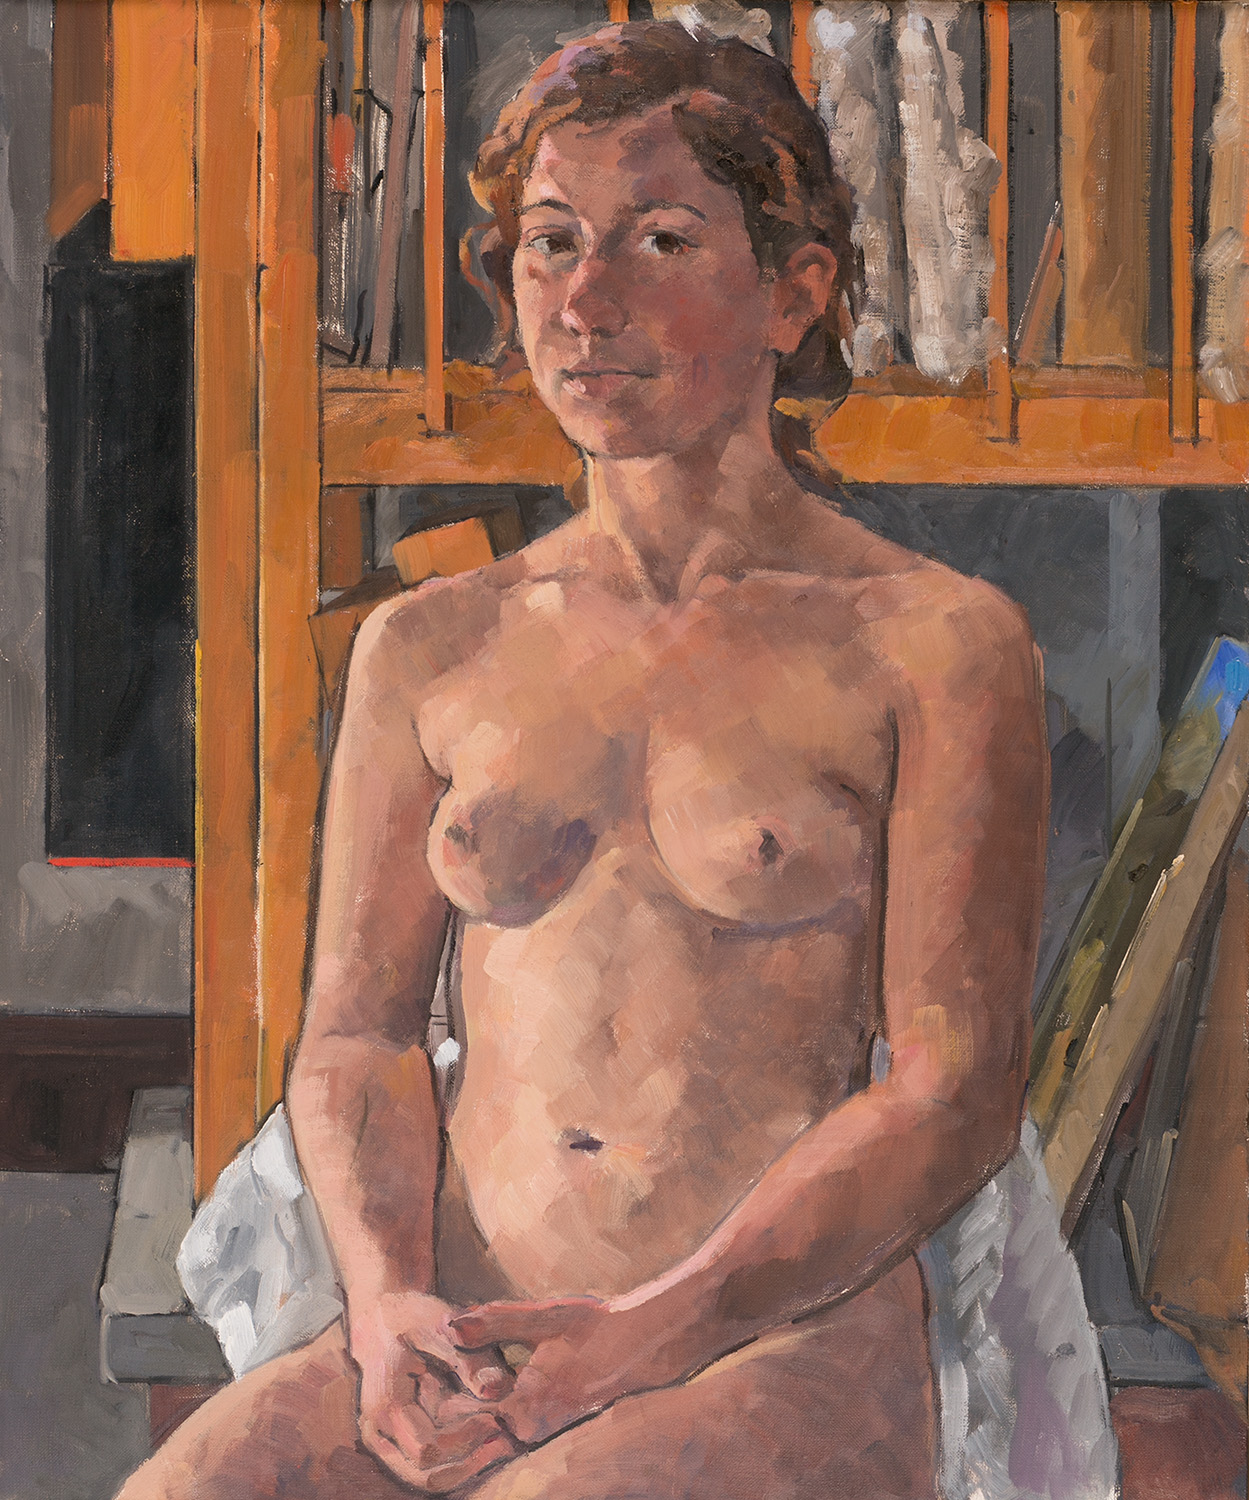 Jackie seated by Frederick Ortner (larger)